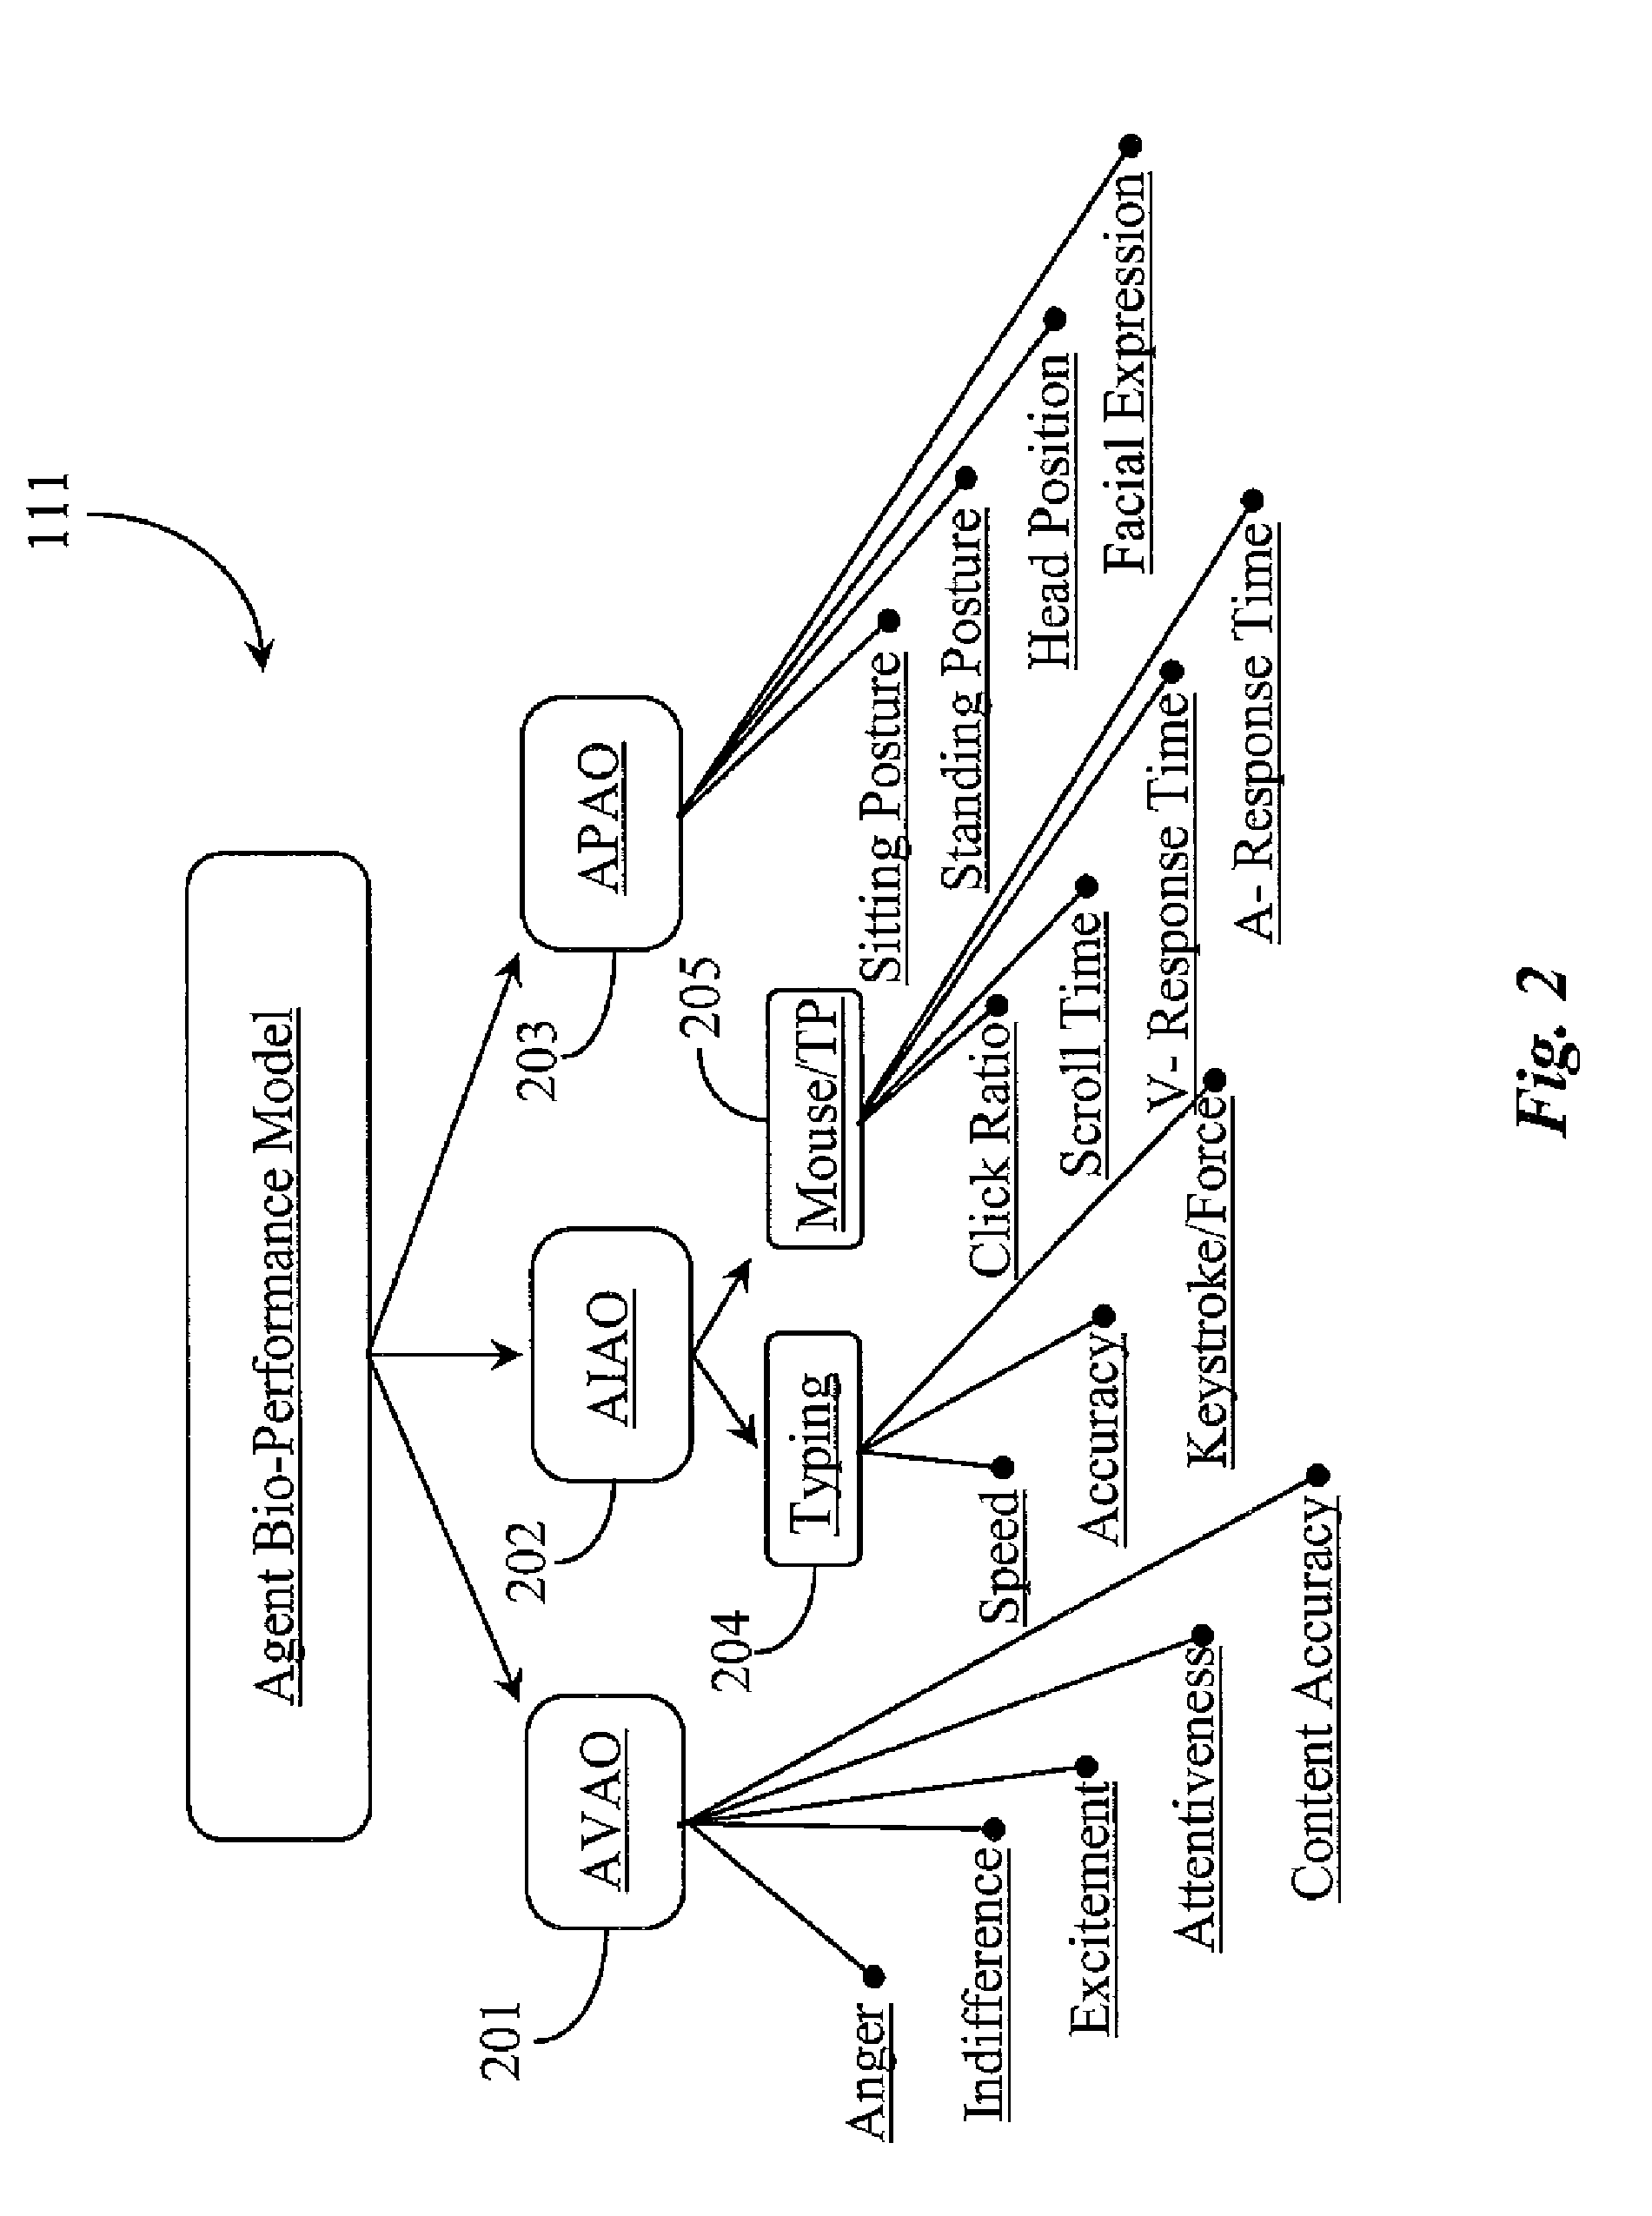 System for routing interactions using bio-performance attributes of persons as dynamic input